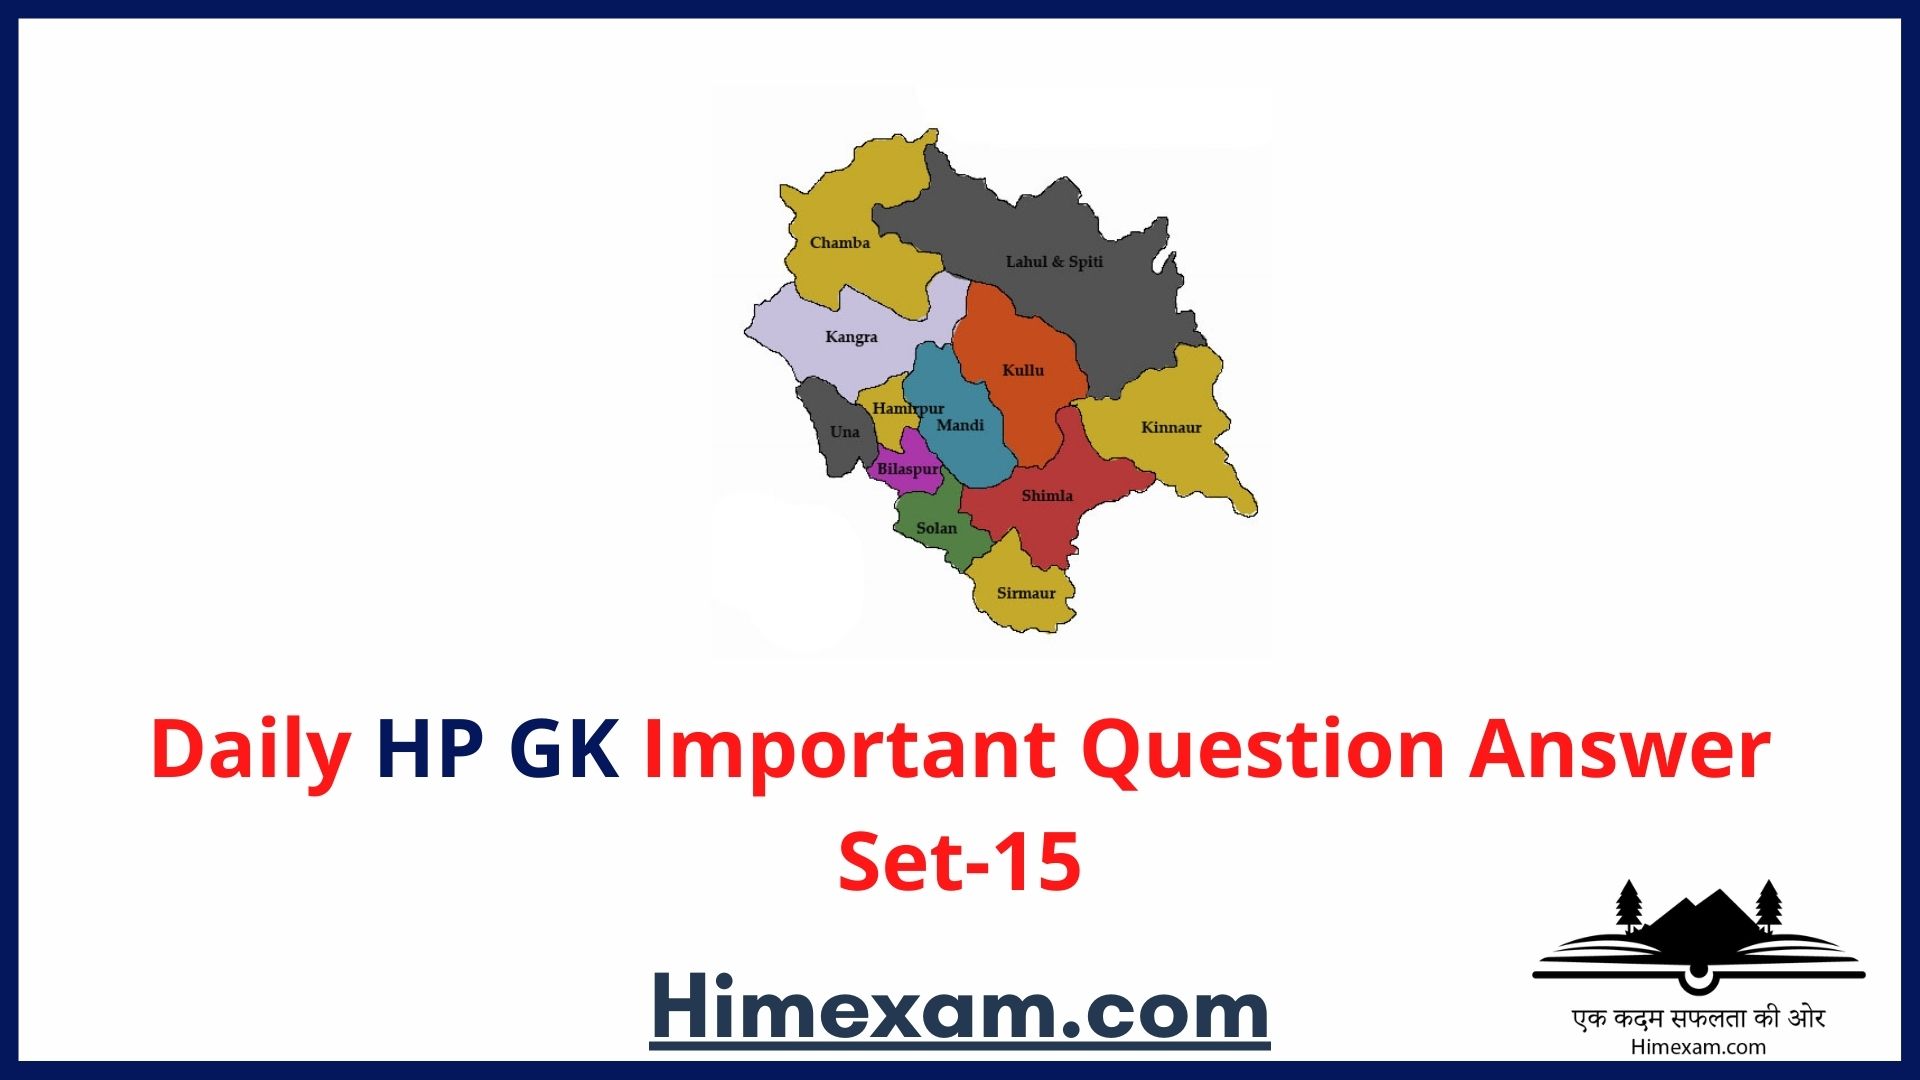 Daily HP GK Important Question Answer Set-15